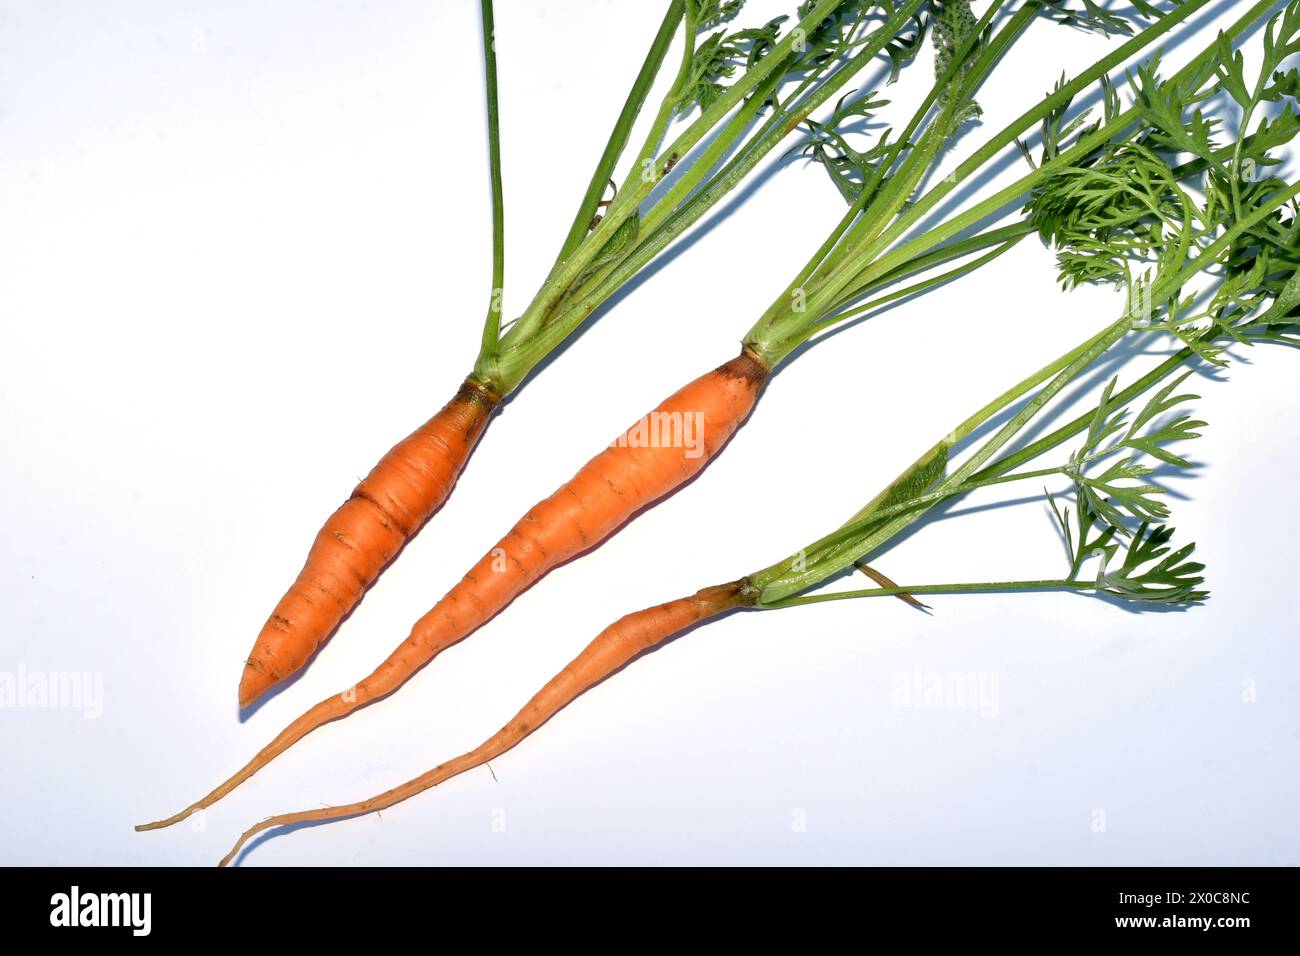 The picture shows a botanical illustration of a carrot plant, its three fruits with green leaves. Stock Photo